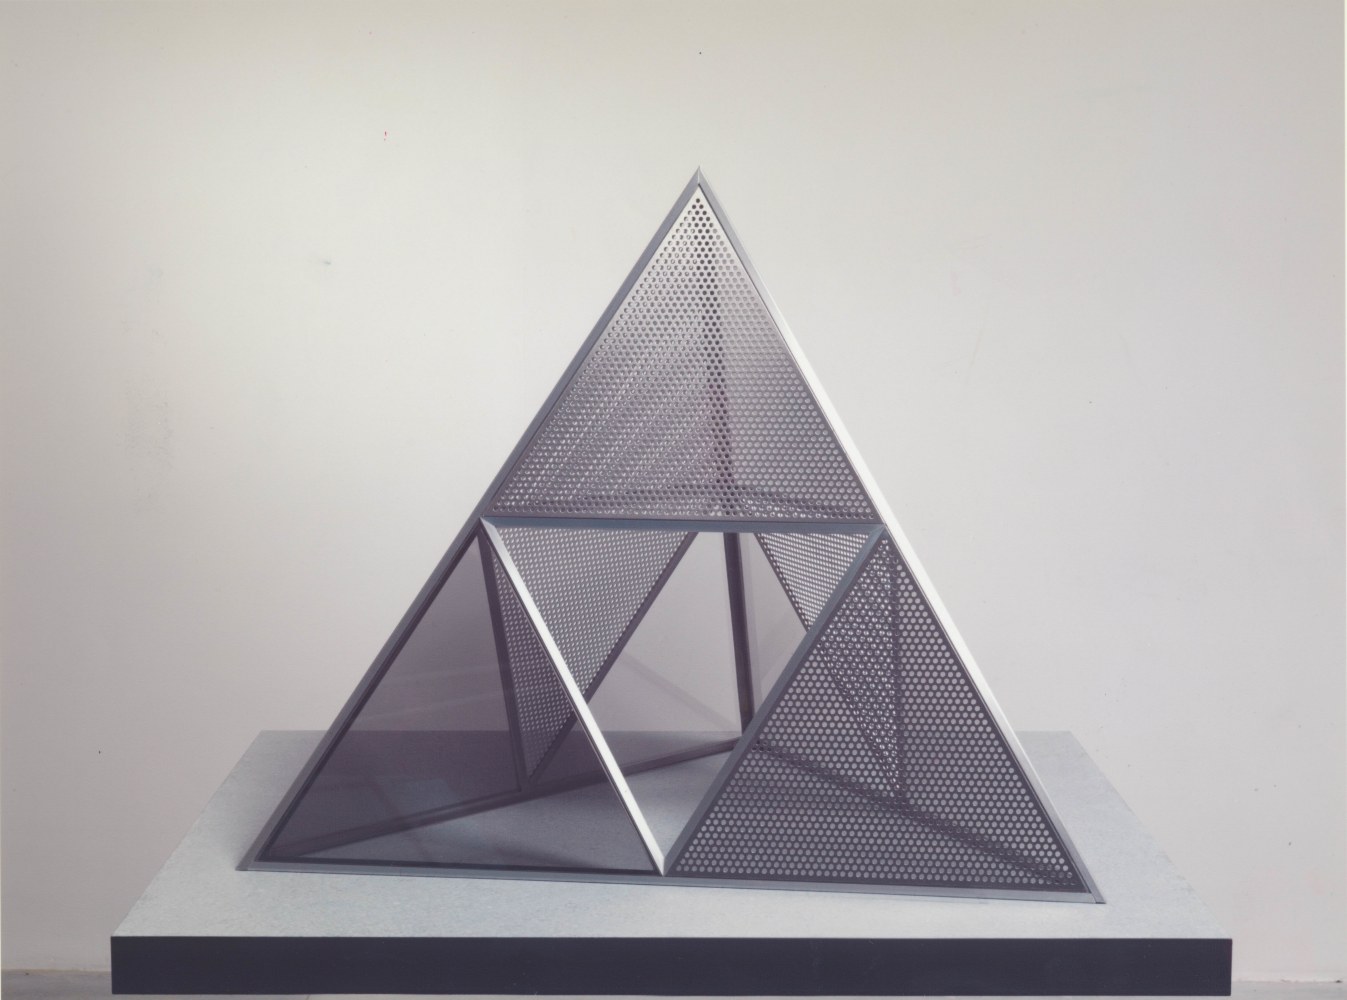 Dan Graham

Shinohara&amp;rsquo;s Pyramid

2021

Two-way mirror, perforated metal

180 x 215 x 215 inches (457.2 x 546.1 x 546.1 cm)

DG 177

&amp;nbsp;

INQUIRE

